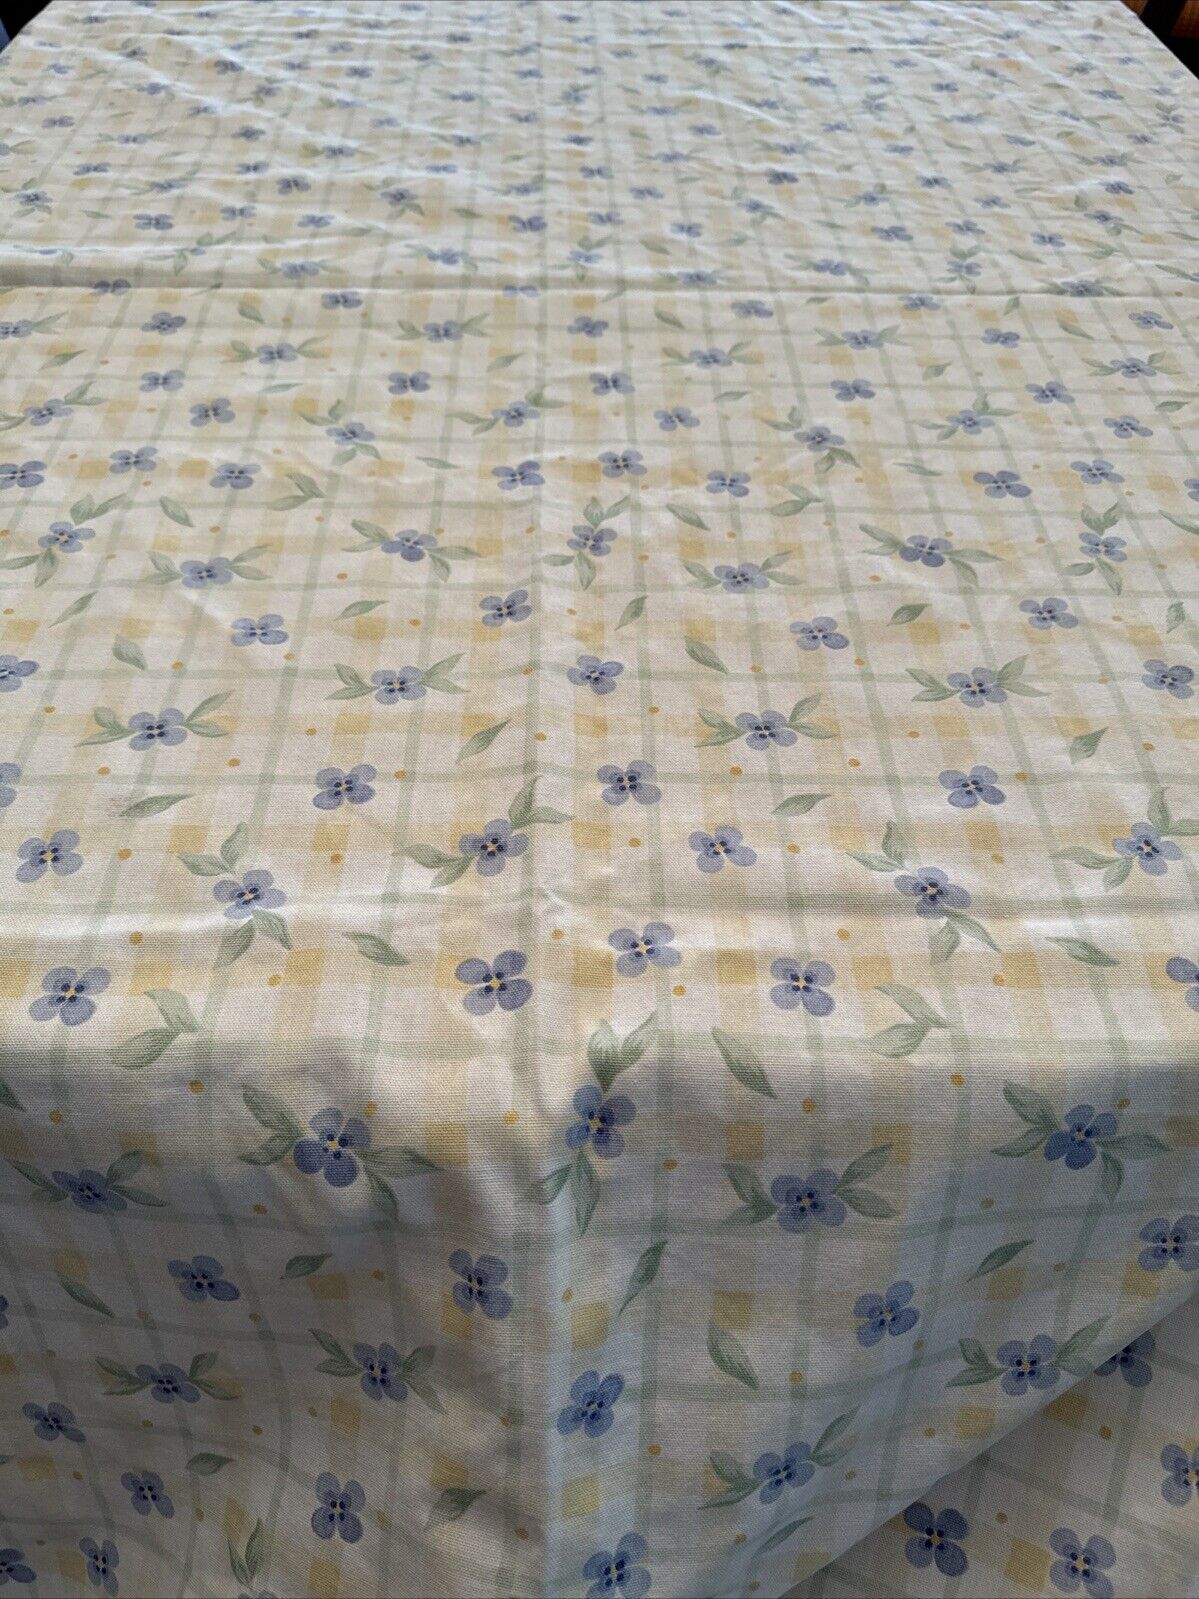 Vintage Oval Yellow Check And Blue Floral Cotton Tablecloth 60”x84”